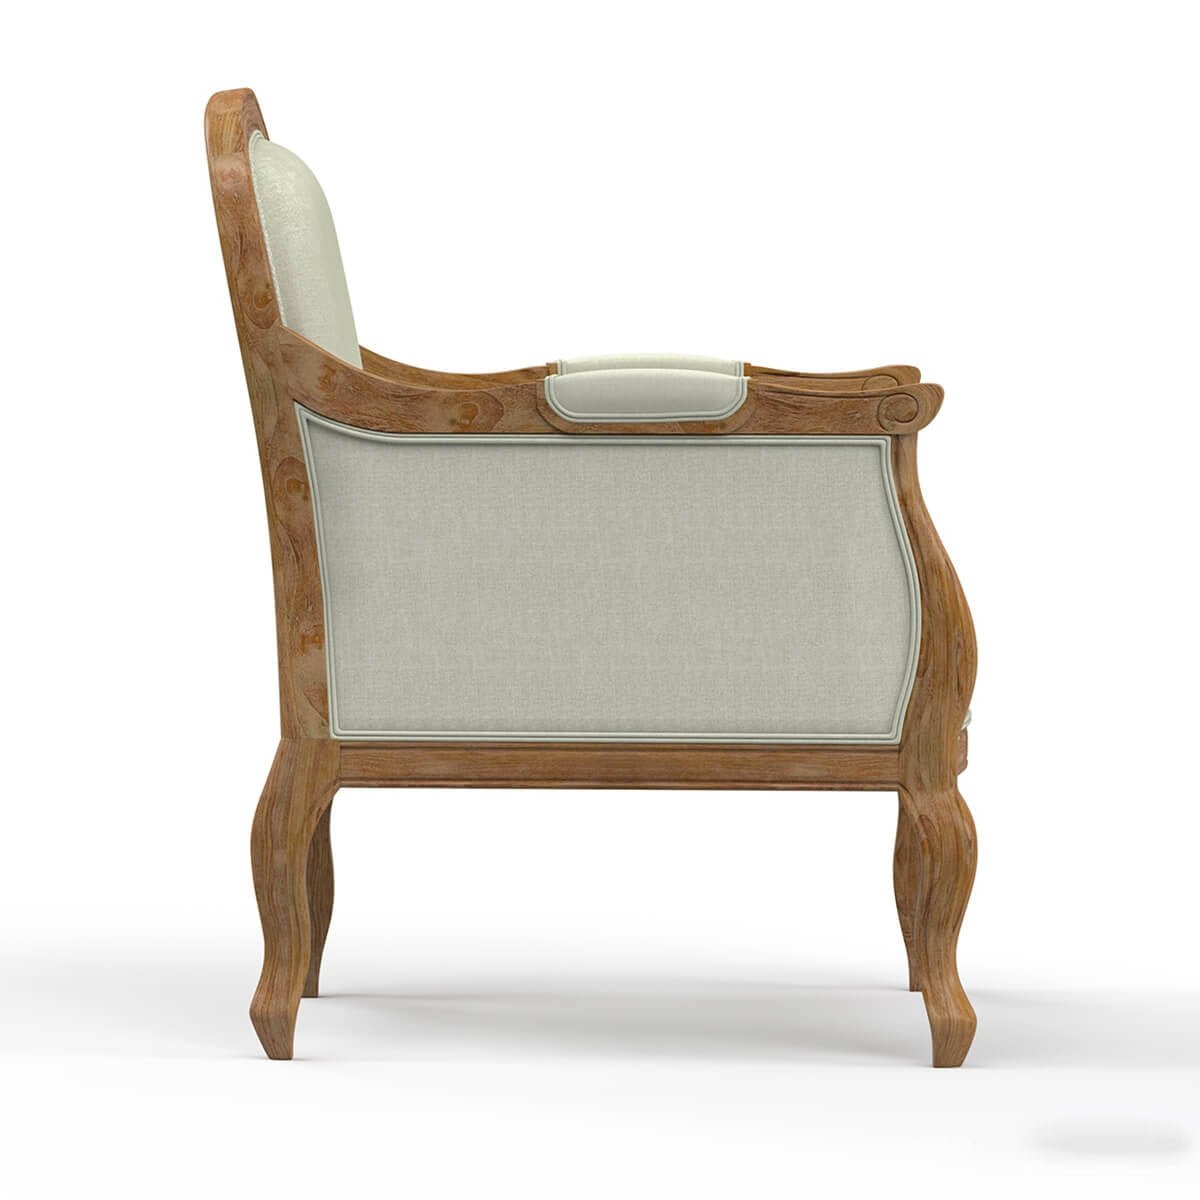 Waregem Rustic Solid Wood Upholstered Accent Chair